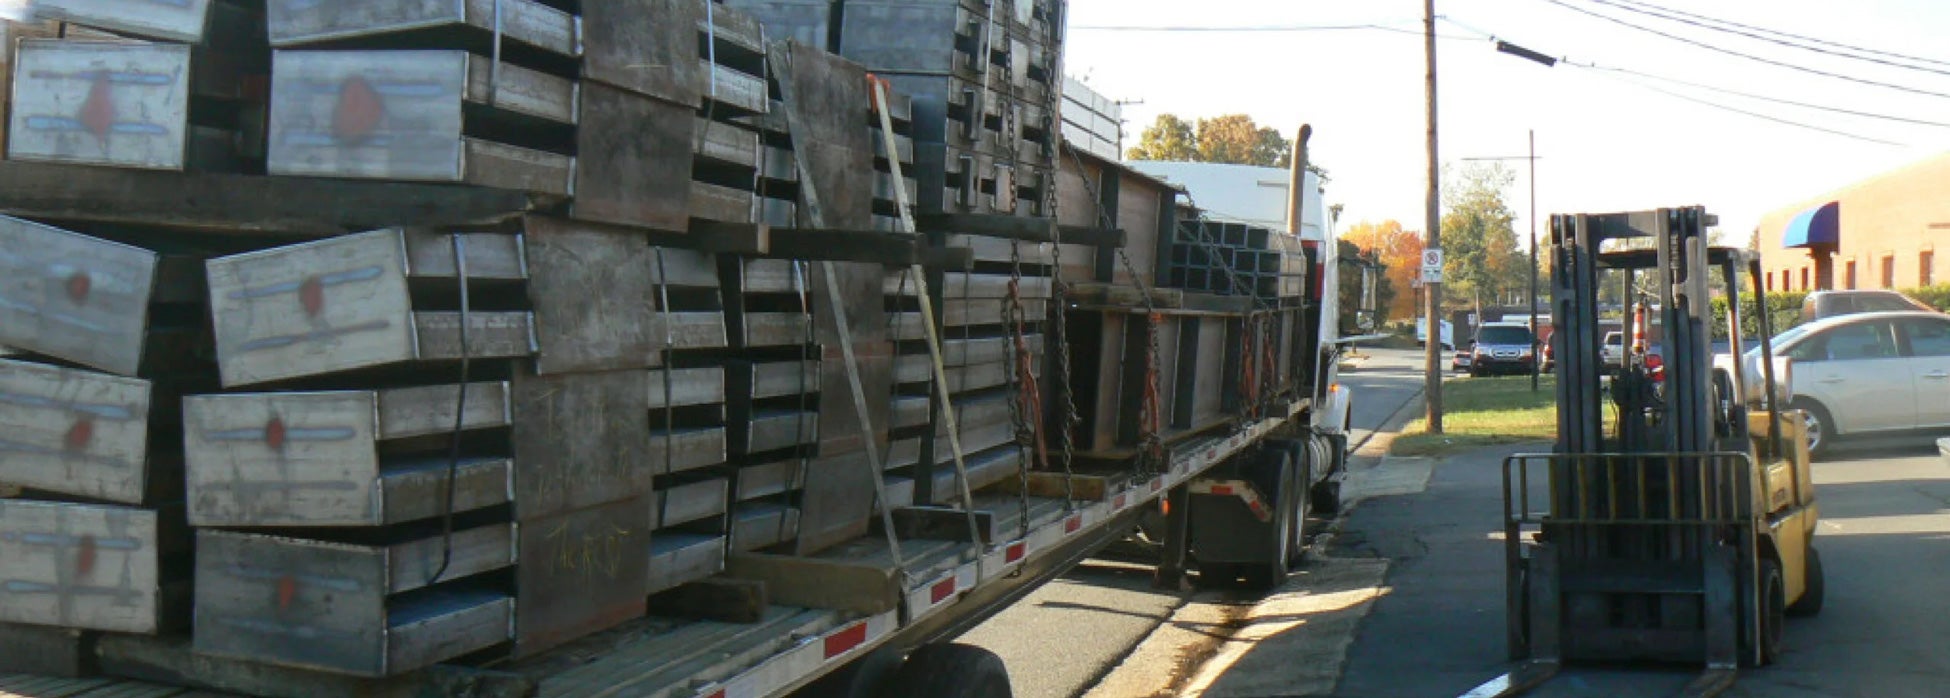 truck with pallets, and a forklift